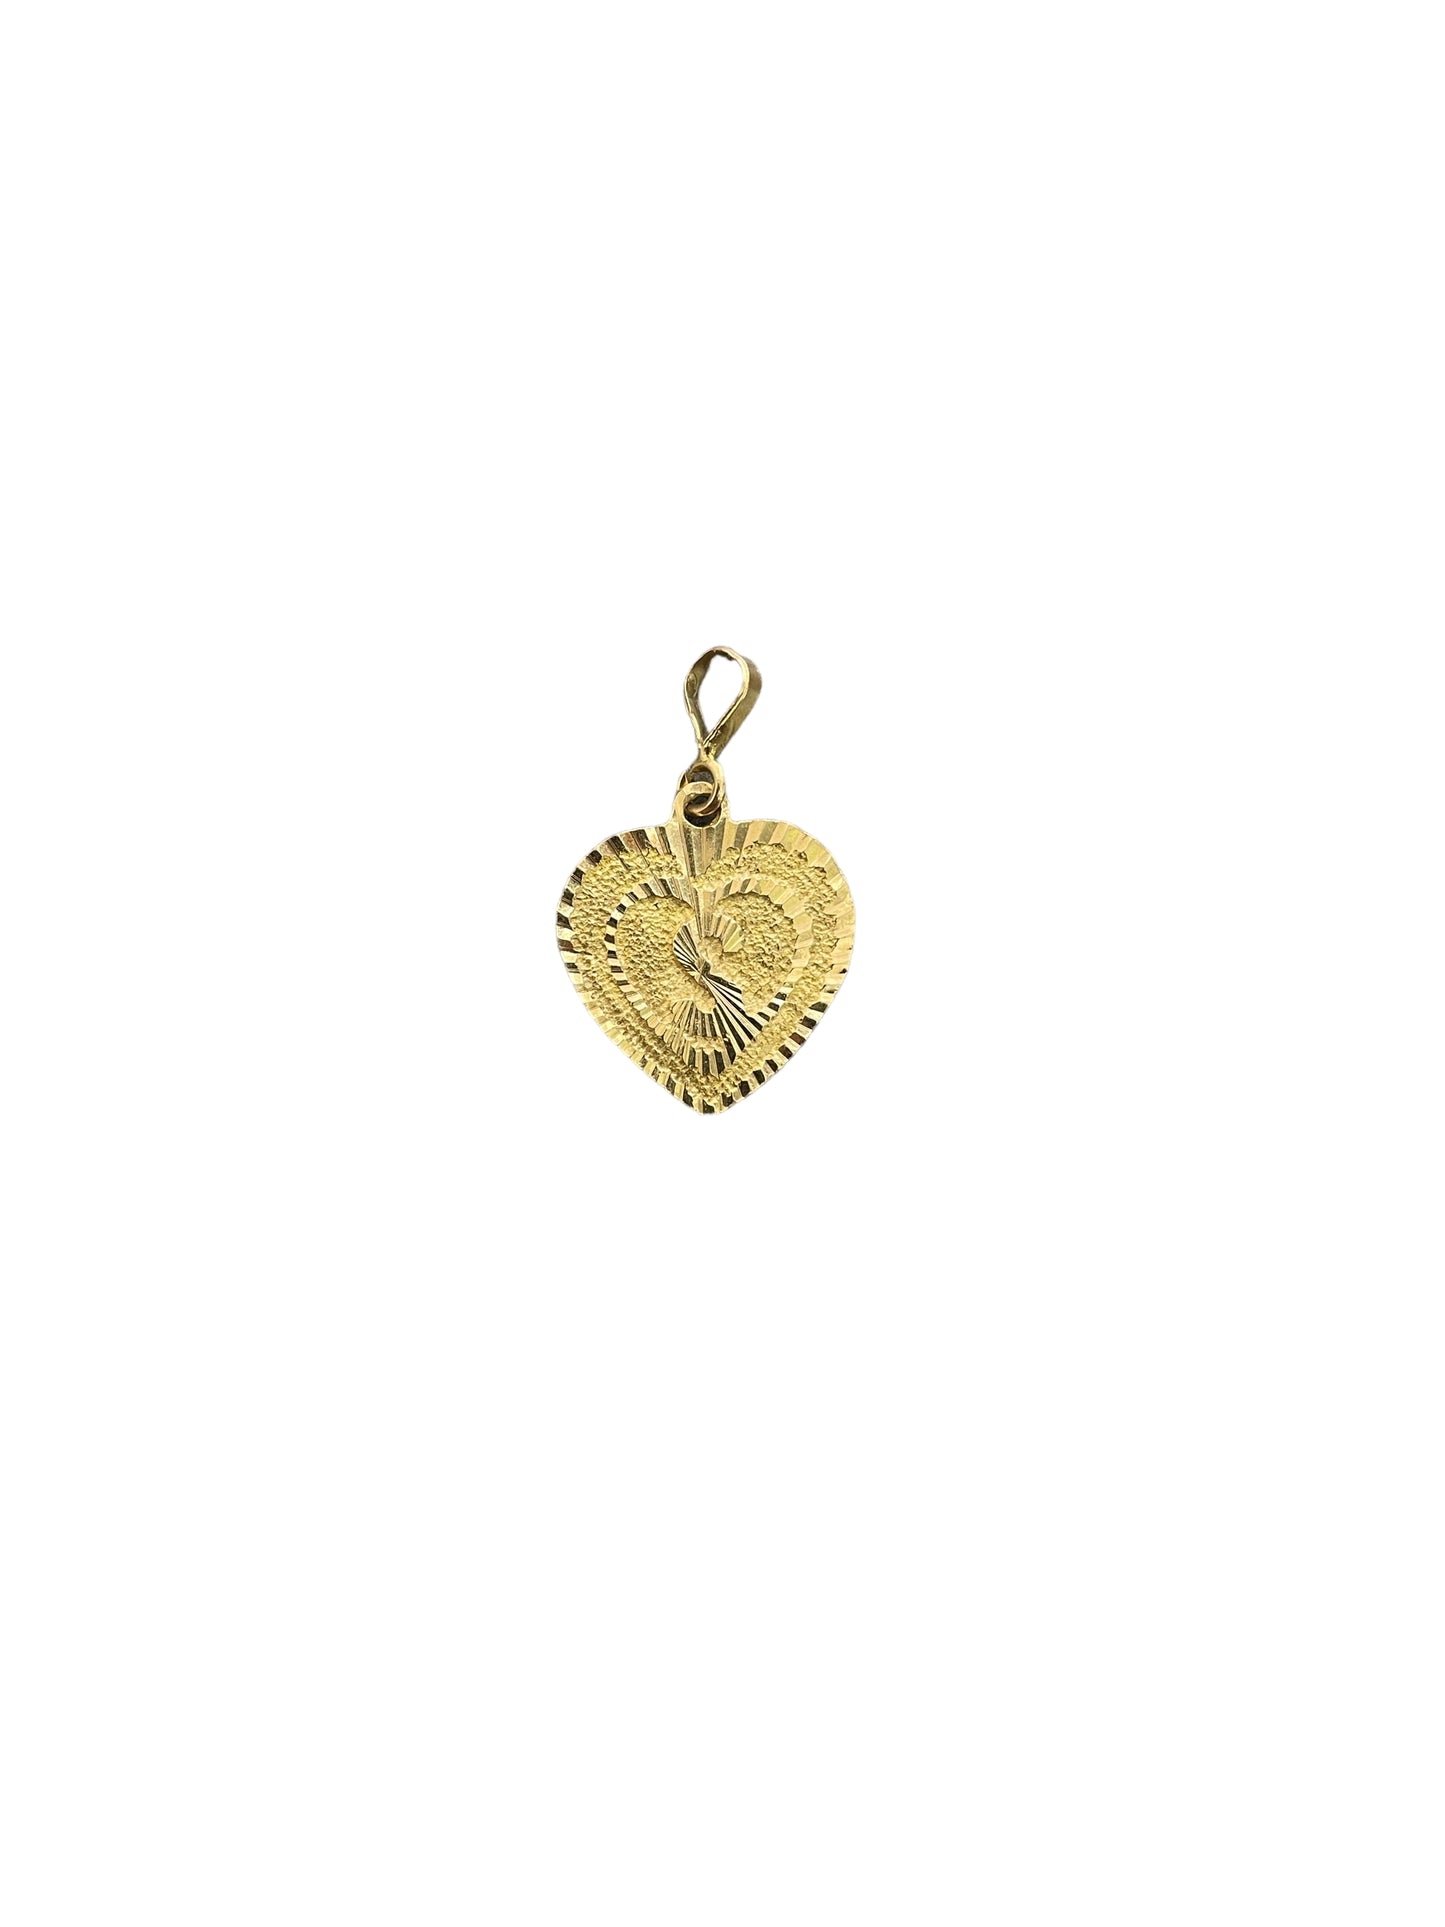 21K Yellow Gold Heart Shaped "S" Charm (1.2 Grams)